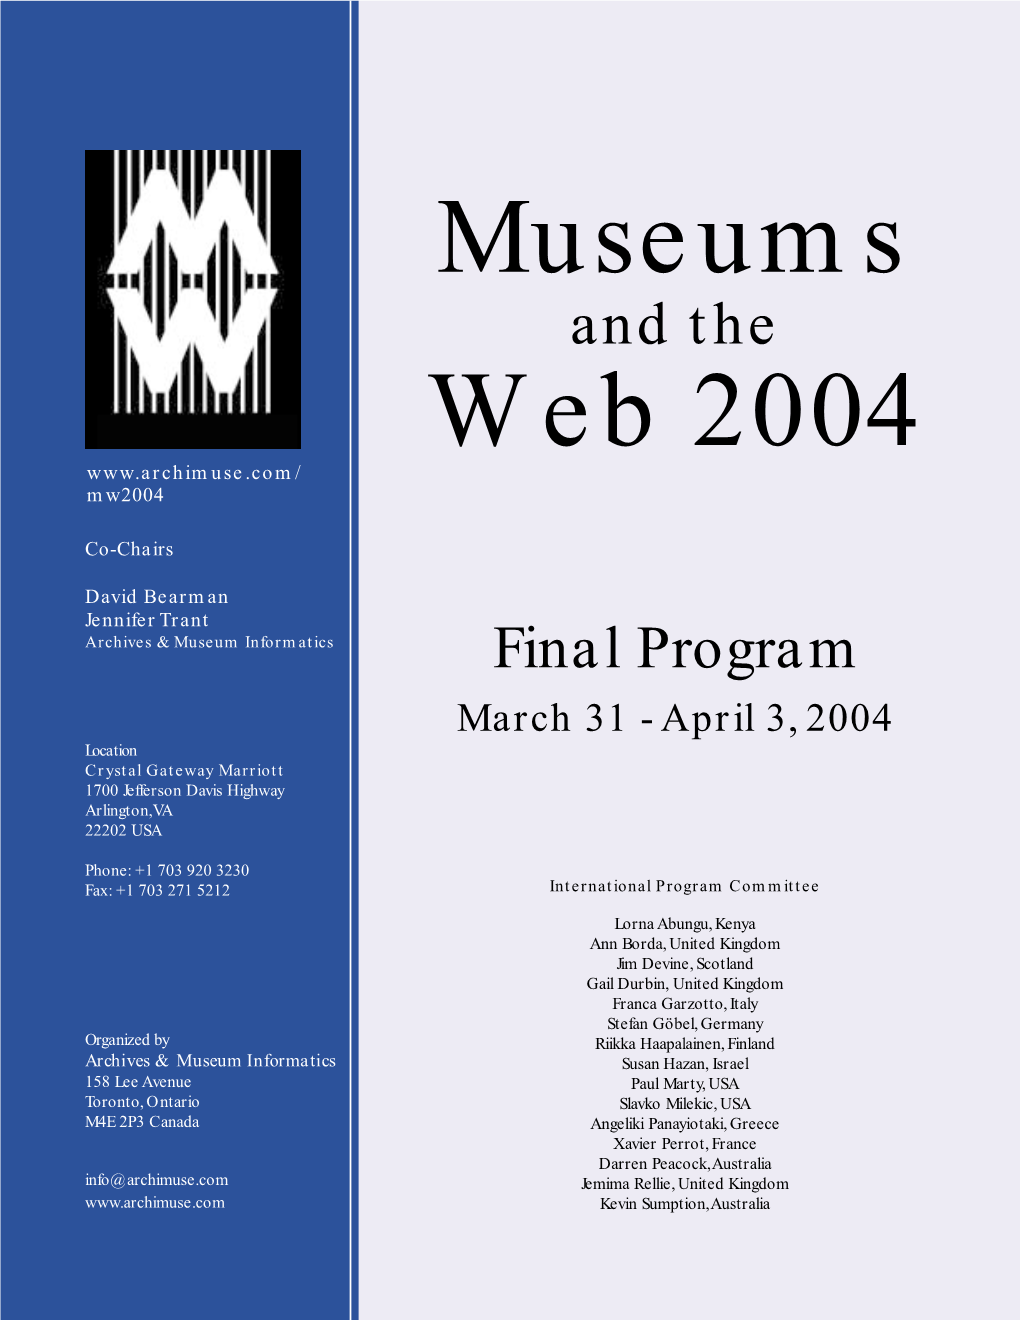 Museums and the Web Final Program